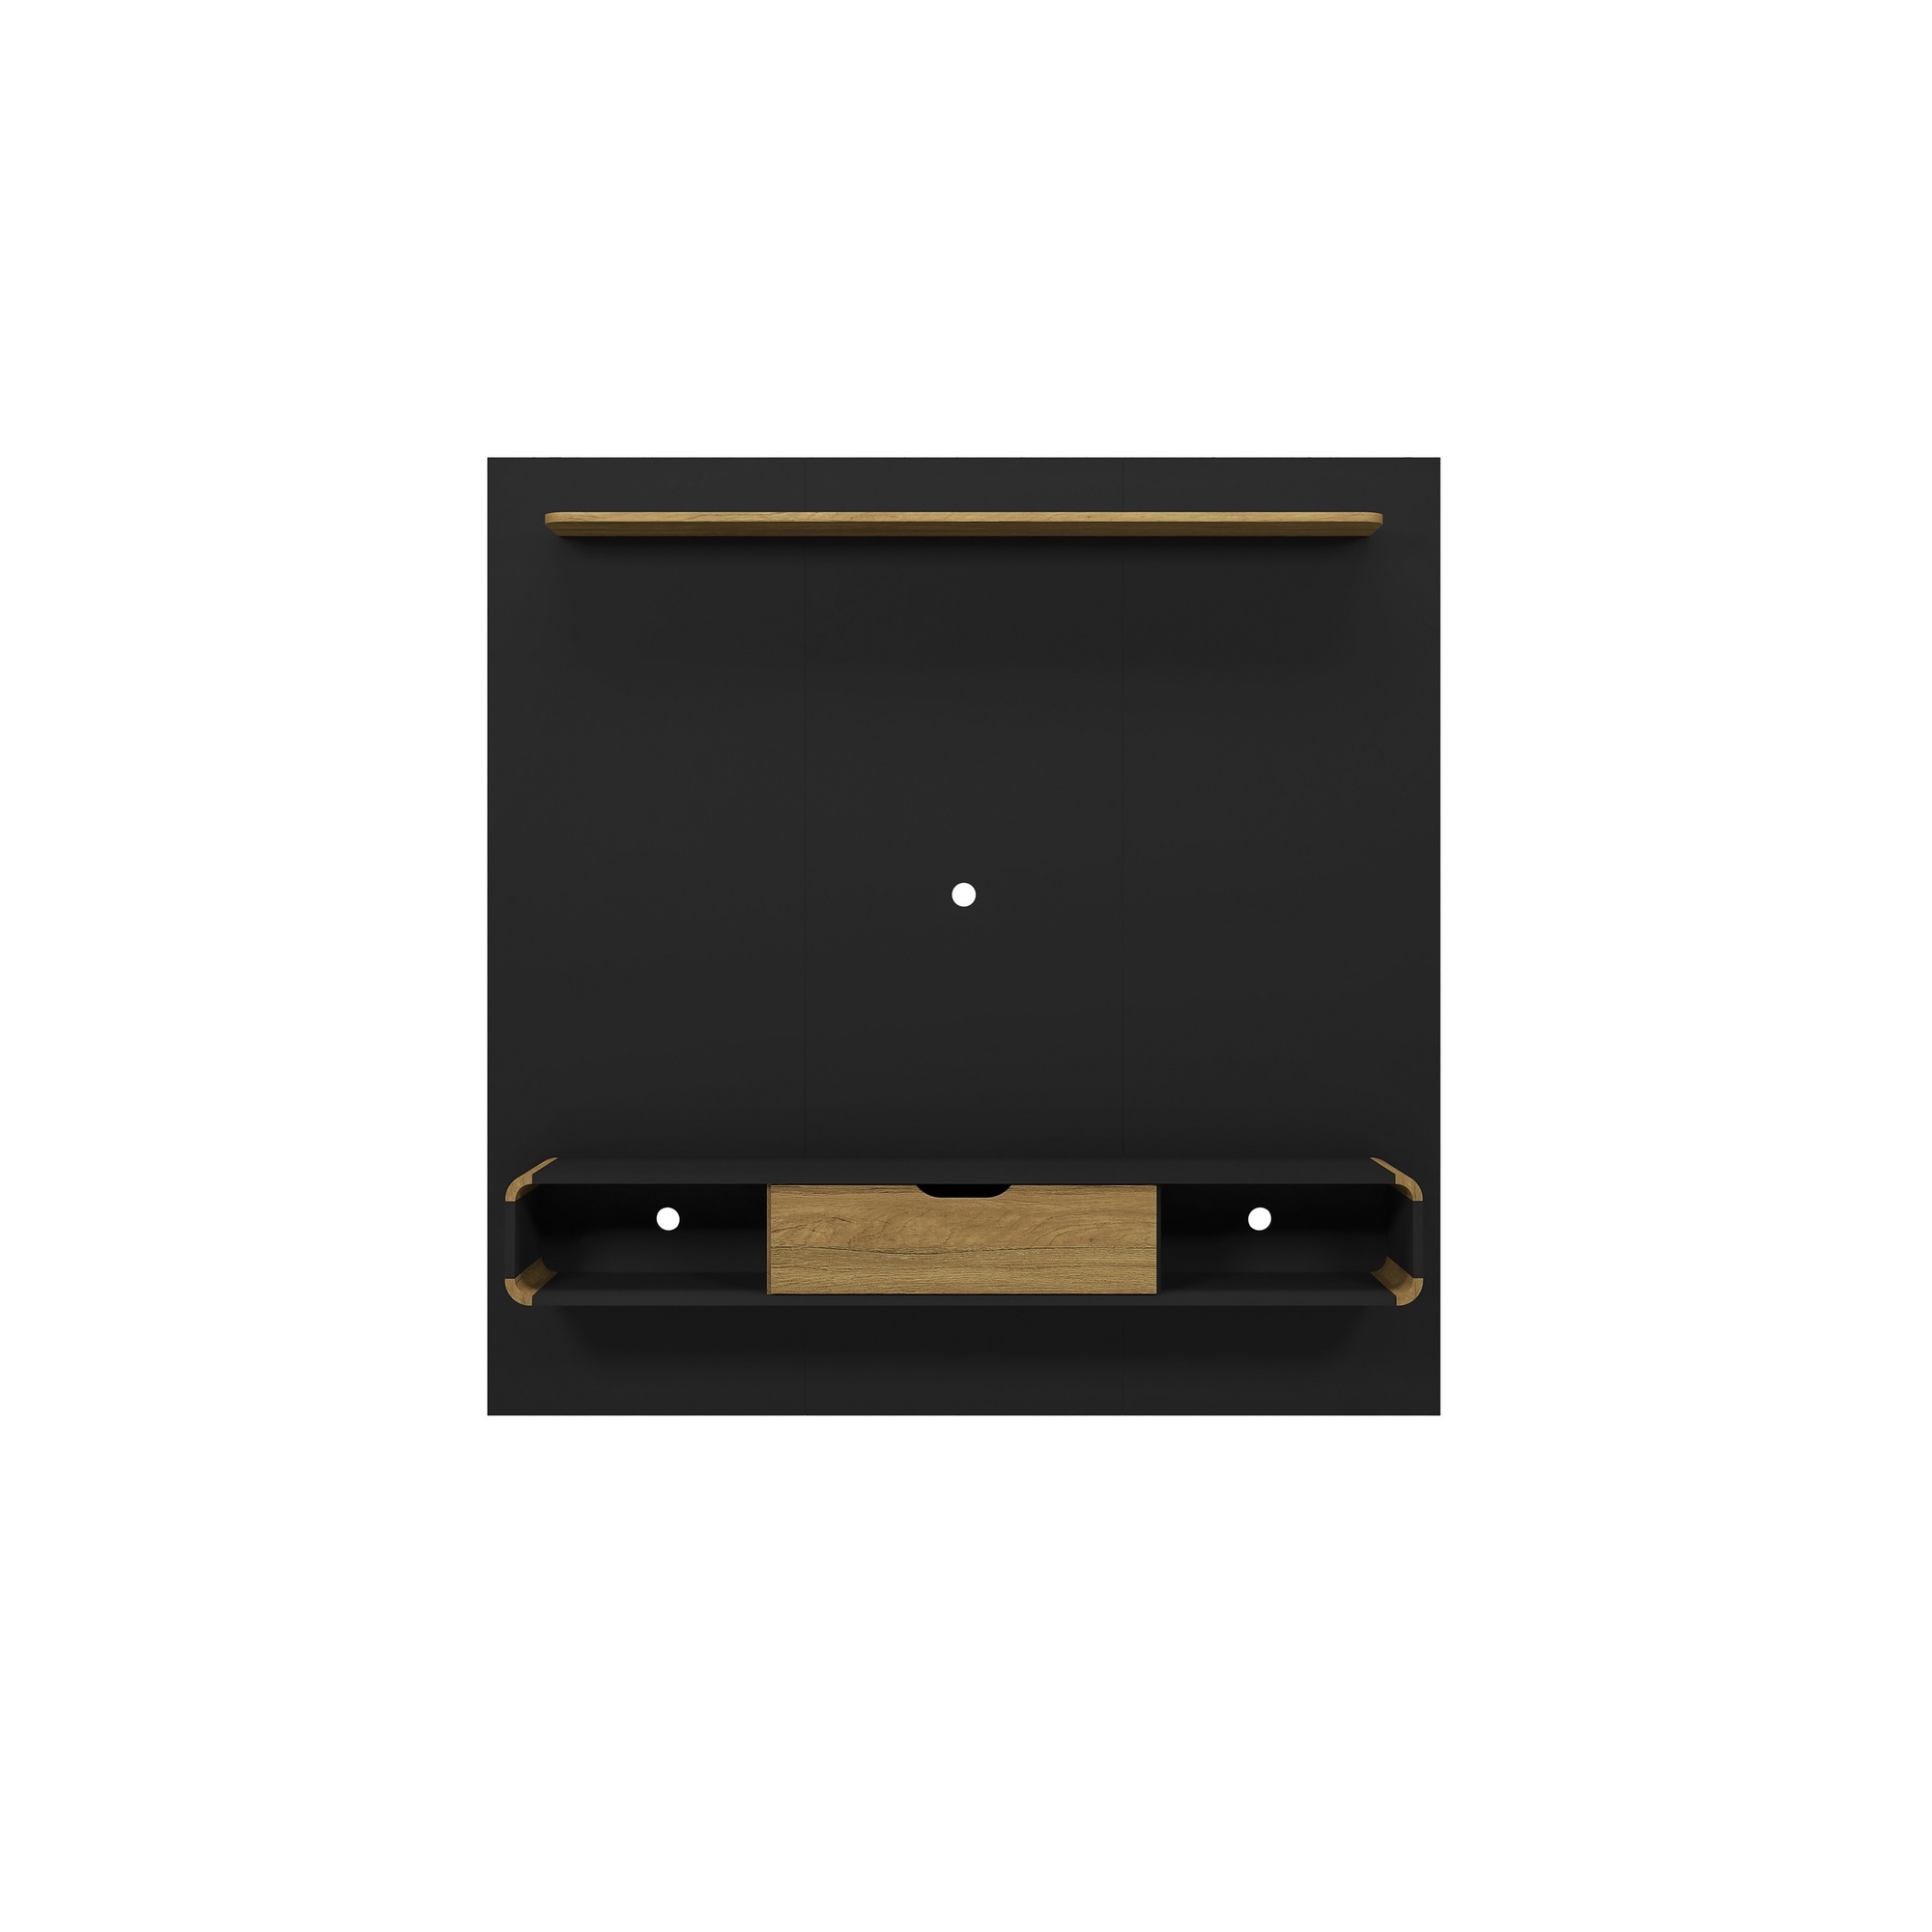 Manhattan Comfort, Camberly 62.36 Floating Ent Cntr 3 Shelves Black, Width 62.36 in, Height 63.19 in, Depth 11.65 in, Model 247BMC